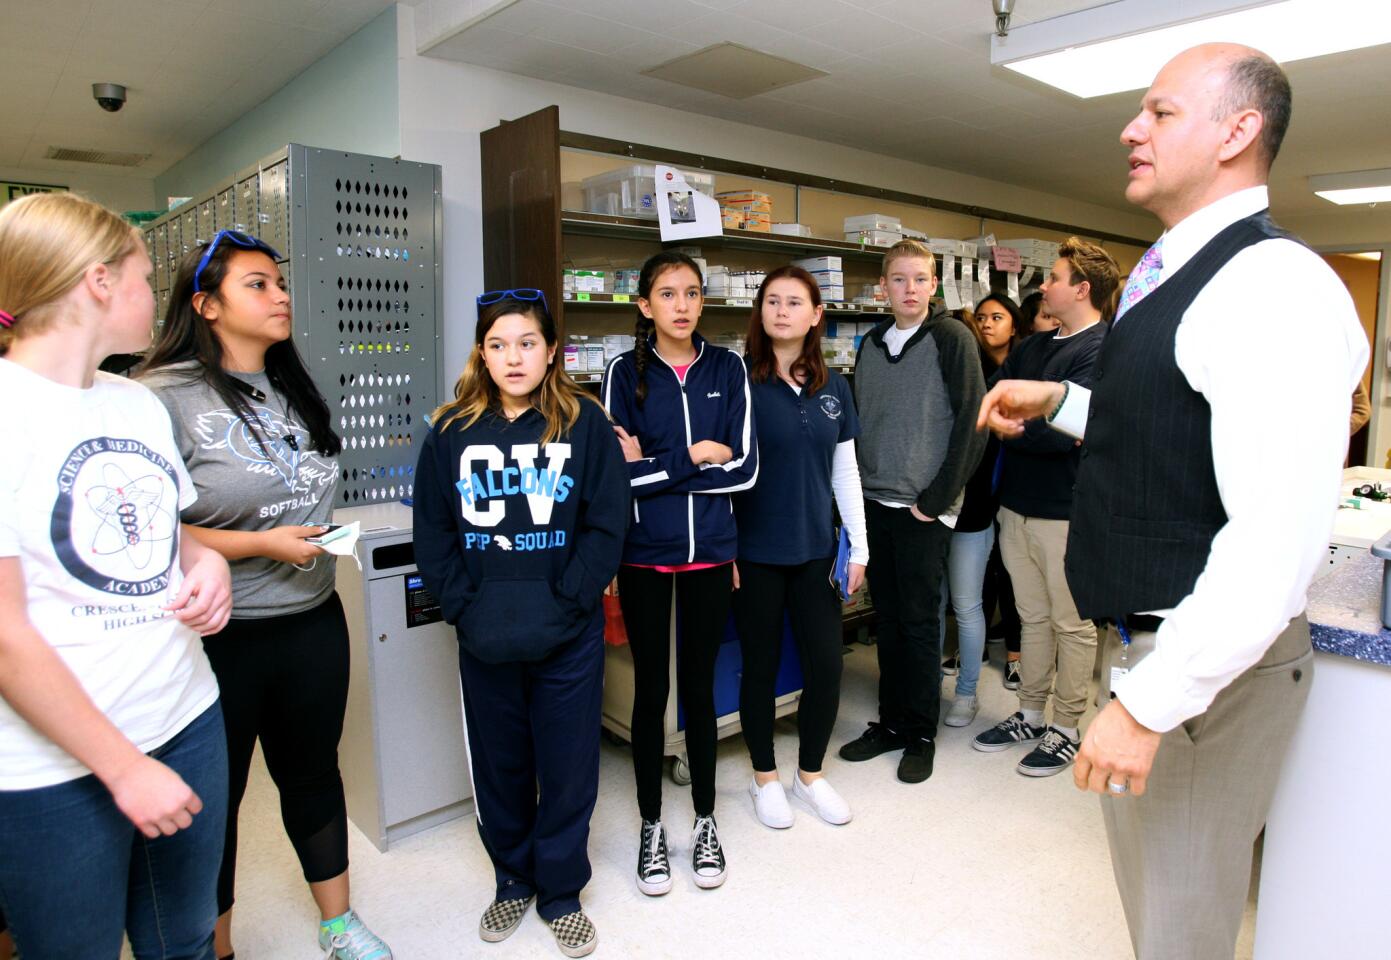 Glendale Adventist Medical Center's director of pharmaceutical services Romic Eskandarian, Pharm.D., explains what his department does in comparison to what a general pharmacy can provide, during a visit by the Crescenta Valley High School's Science and Medicine Academy to the hospital in Glendale on Thursday, Feb. 2, 2017. Forty-three students from freshmen to seniors participated in tour of the hospital.